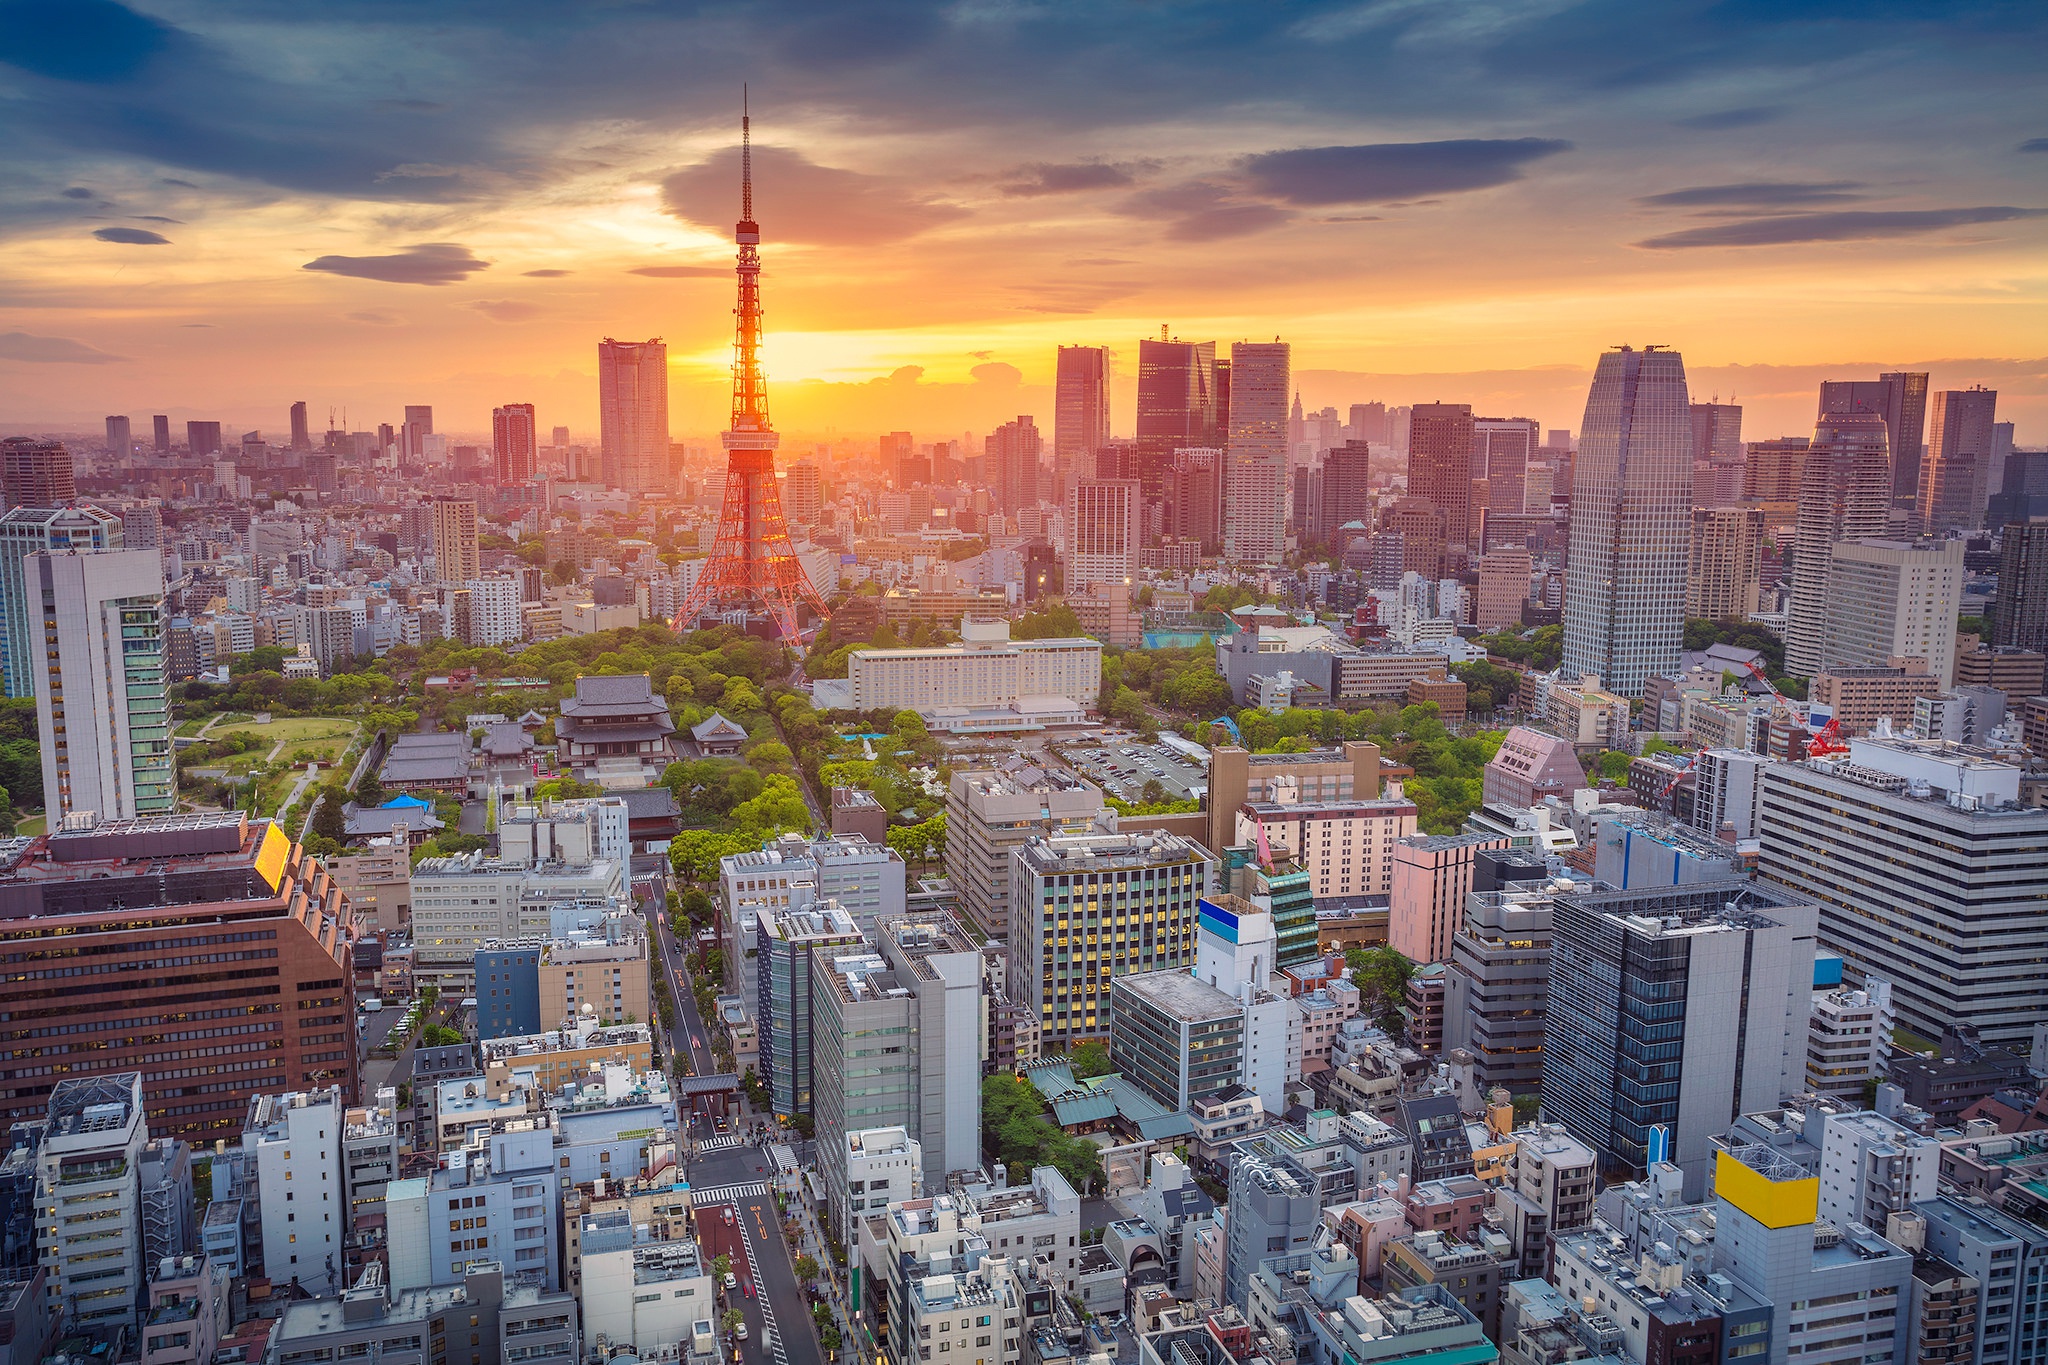 japan, cityscape, tokyo, man made, building, city, skyscraper, sunset, tokyo tower, cities